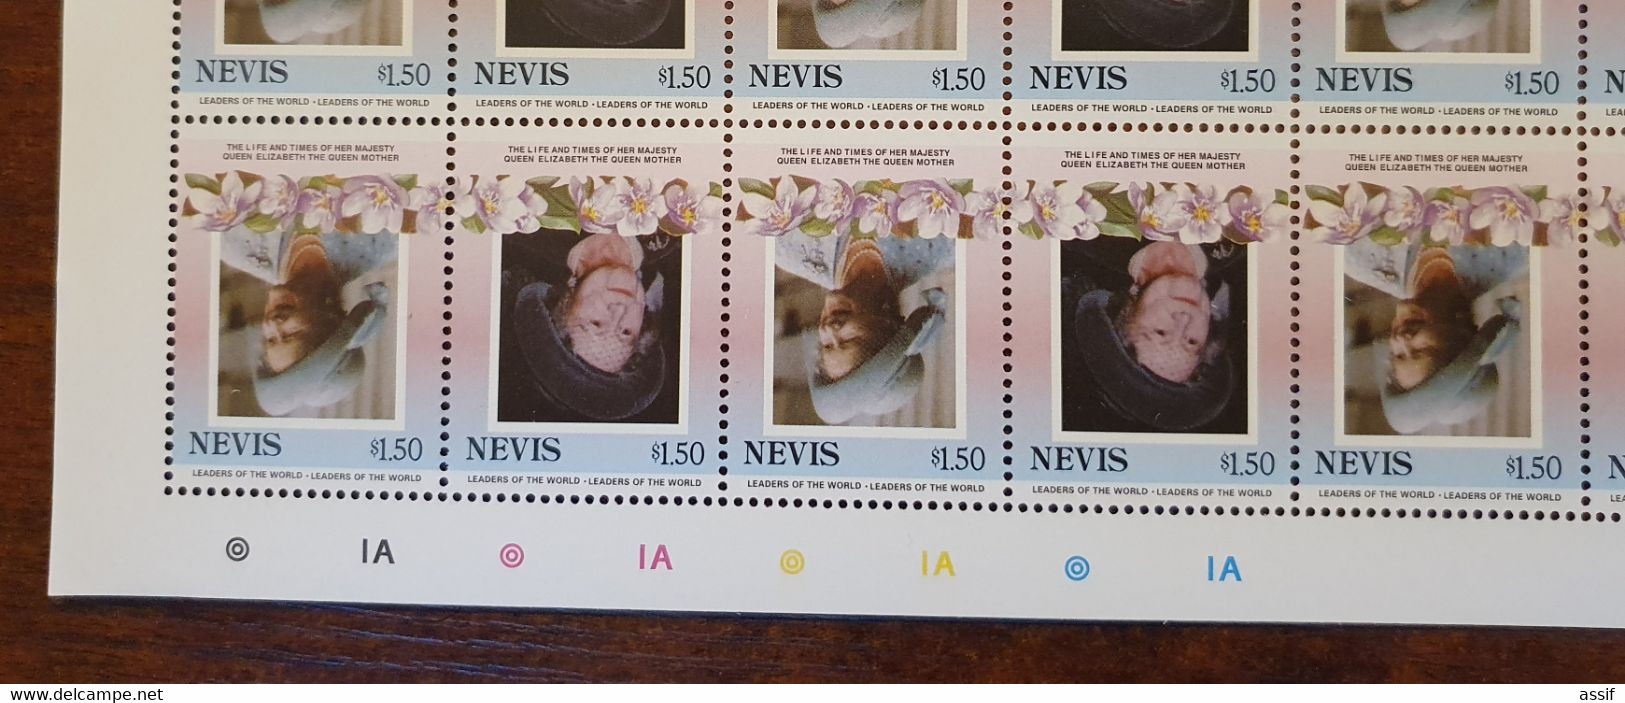 NEVIS 1,50$ 1985 FEUILLE ENTIERE CENTRE RENVERSE SHEET INVERTED YT 317 Et 318 50 TIMBRES NEUFS ** /FREE SHIPPING R - St.Kitts Y Nevis ( 1983-...)